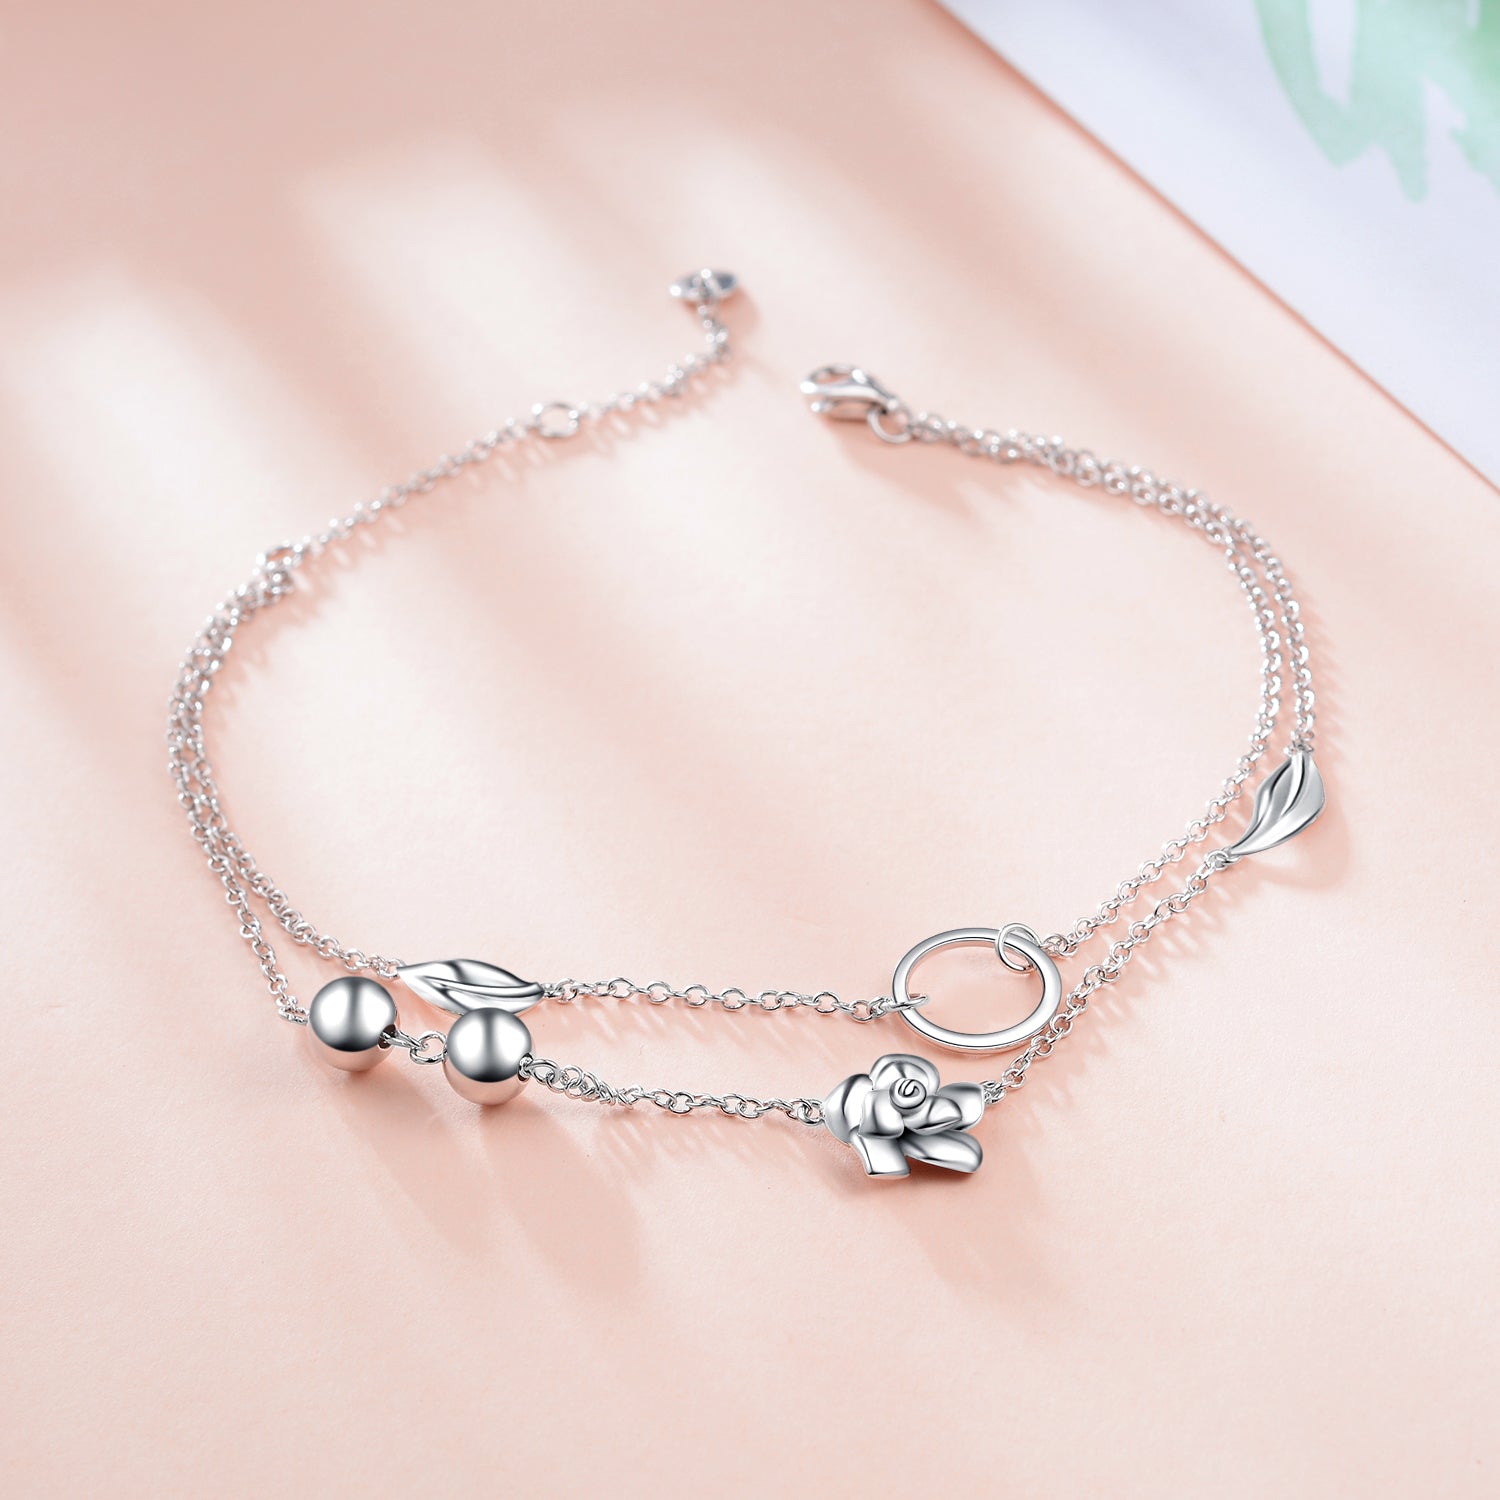 Silver Wholesale 925 Sterling Silver Charm Anklet Wholesale Handmade Jewelry Anklet